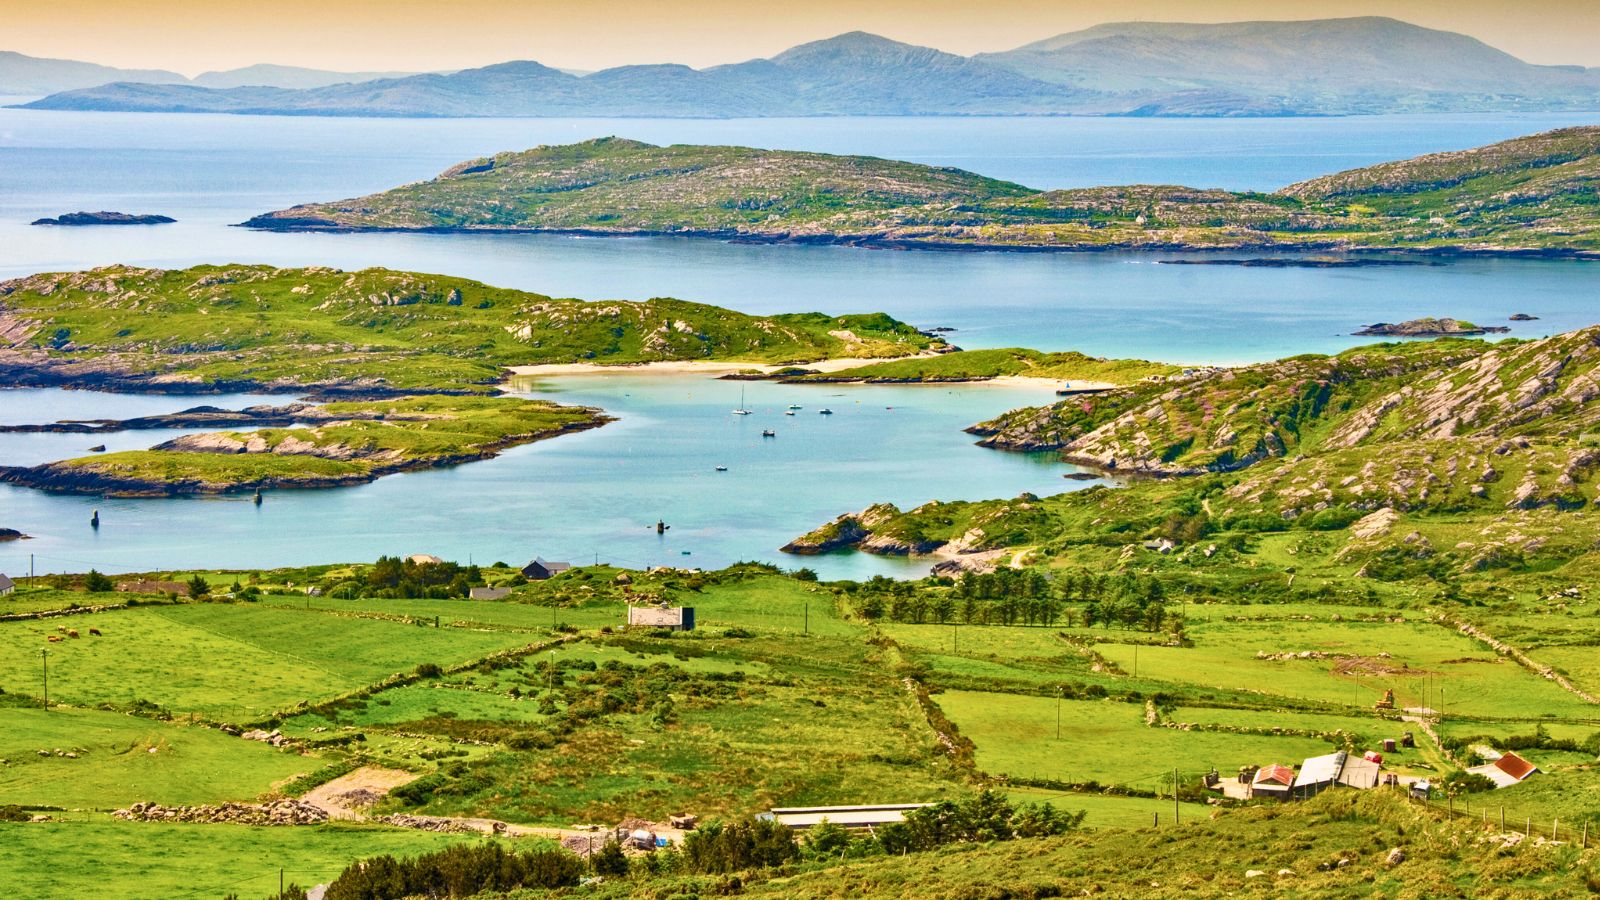 <p>The Ring of Kerry is a 179km (111 mile) circuit around the Iveragh Peninsula in County Kerry. Yet that description really doesn’t do it justice. This is arguably the country’s most scenic drive.</p><p>Think of it as a highlights reel of Ireland’s best bits. The route takes you up epic mountain passes, past lakes, rivers, and waterfalls, and along dramatic stretches of coast. Cute towns dot the circuit, too, including the likes of <em>Killarney</em>, where the Ring of Kerry technically begins and ends.</p>